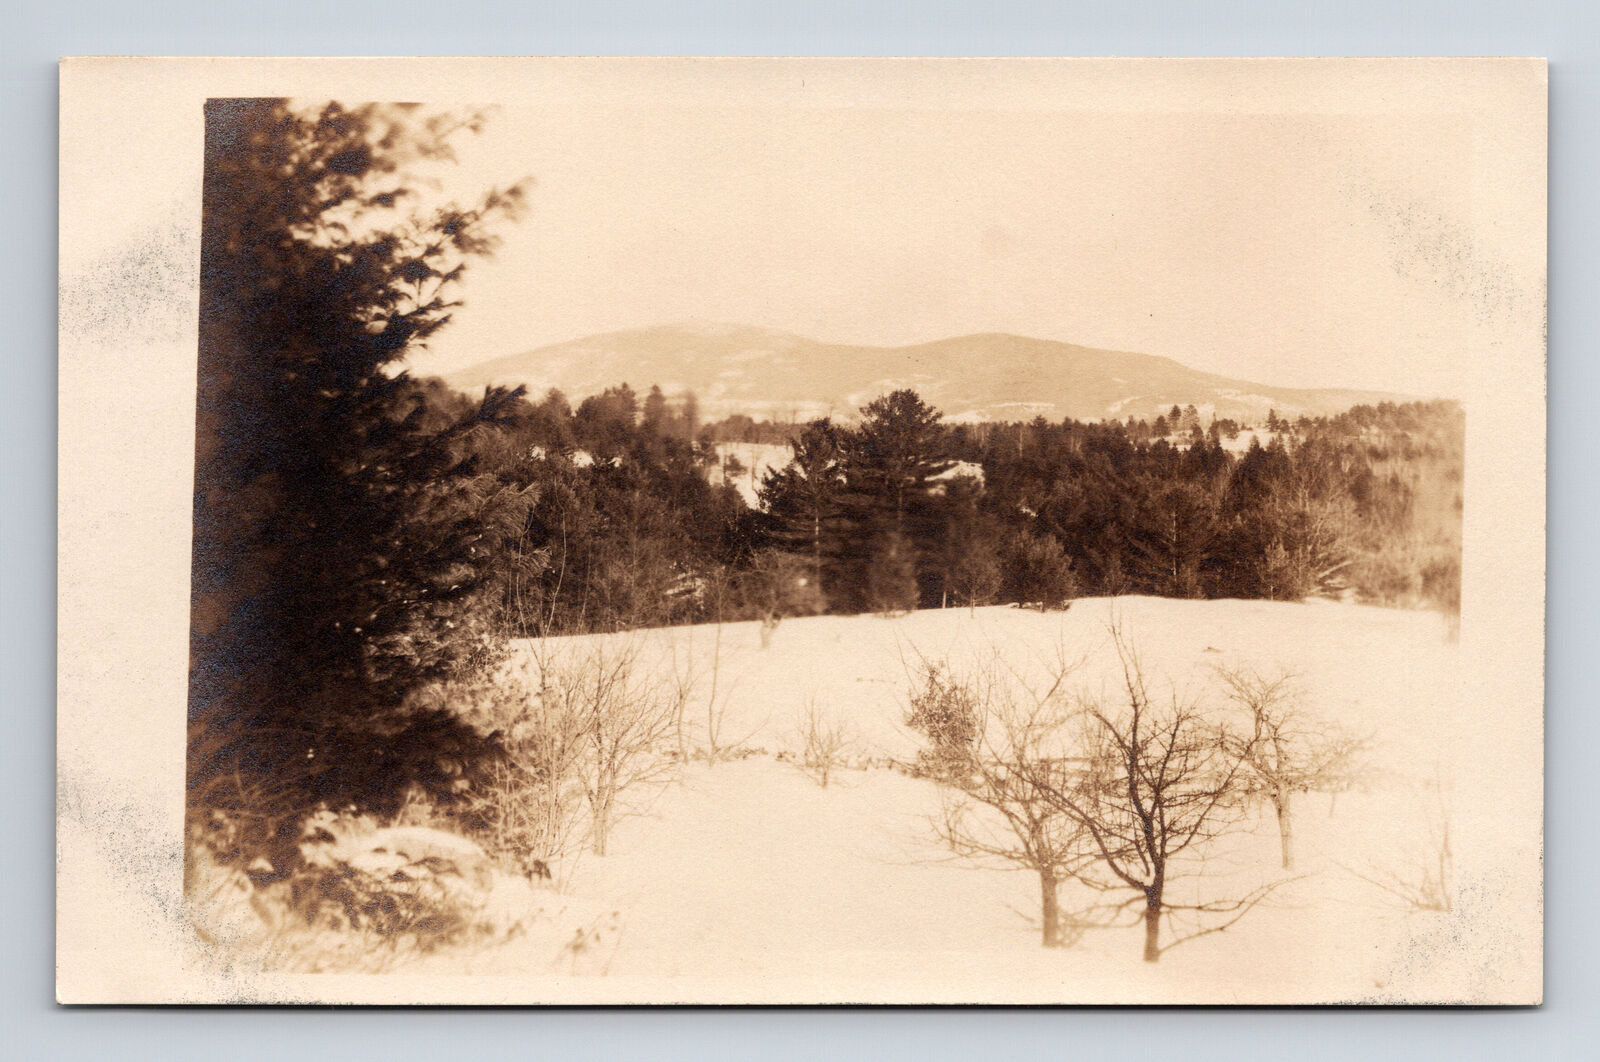 RPPC Scenic Snowy Moutain View Unknown Location Real Photo Postcard